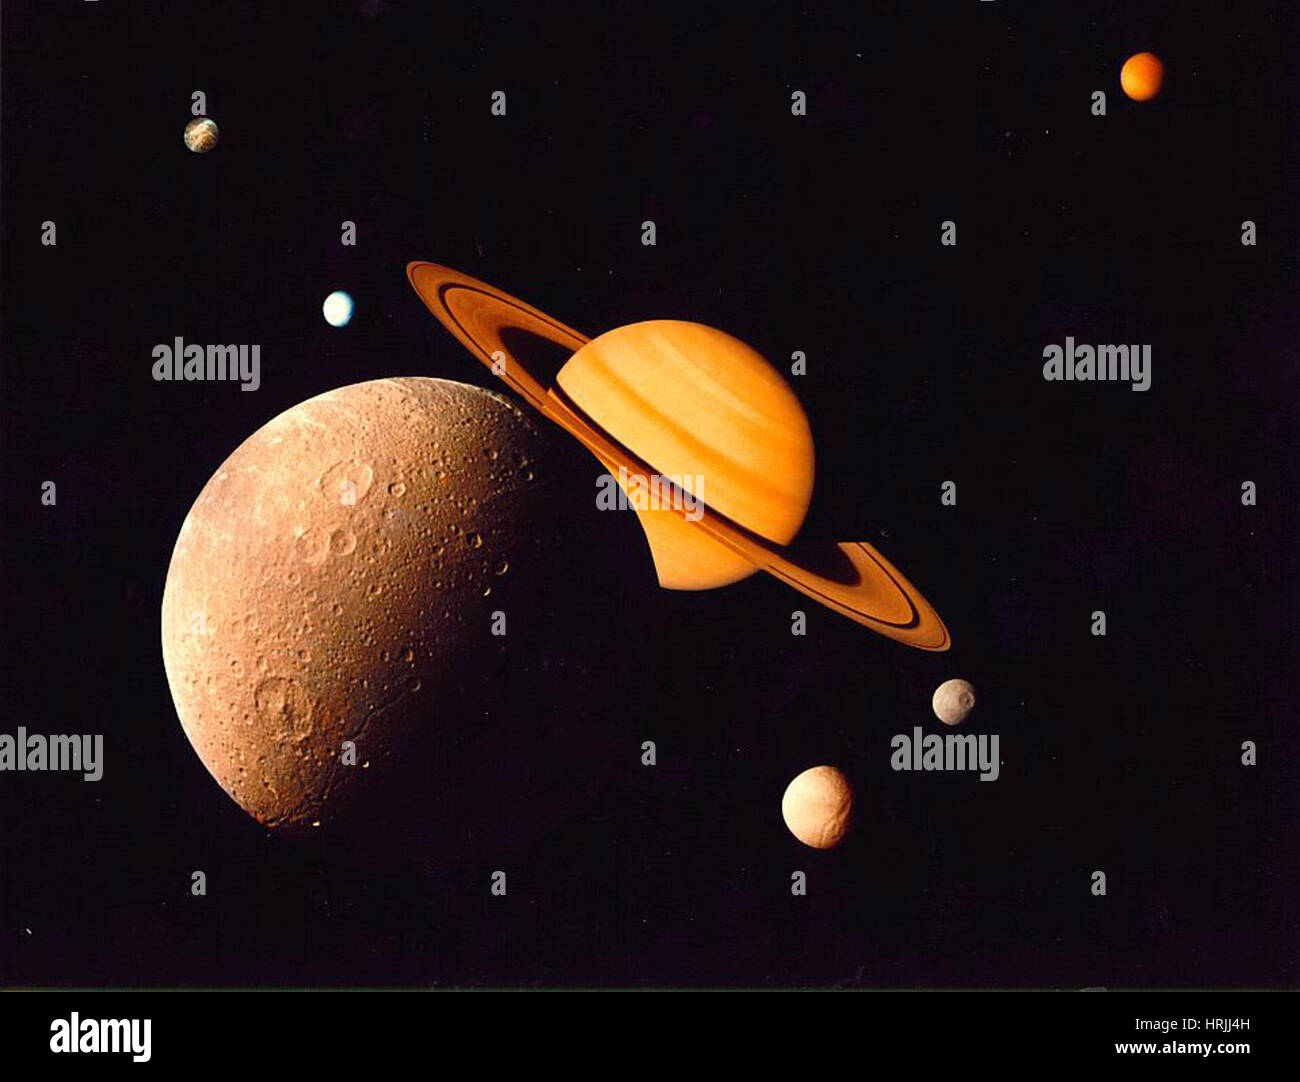 Saturnian System, Voyager 1 Montage Stock Photo